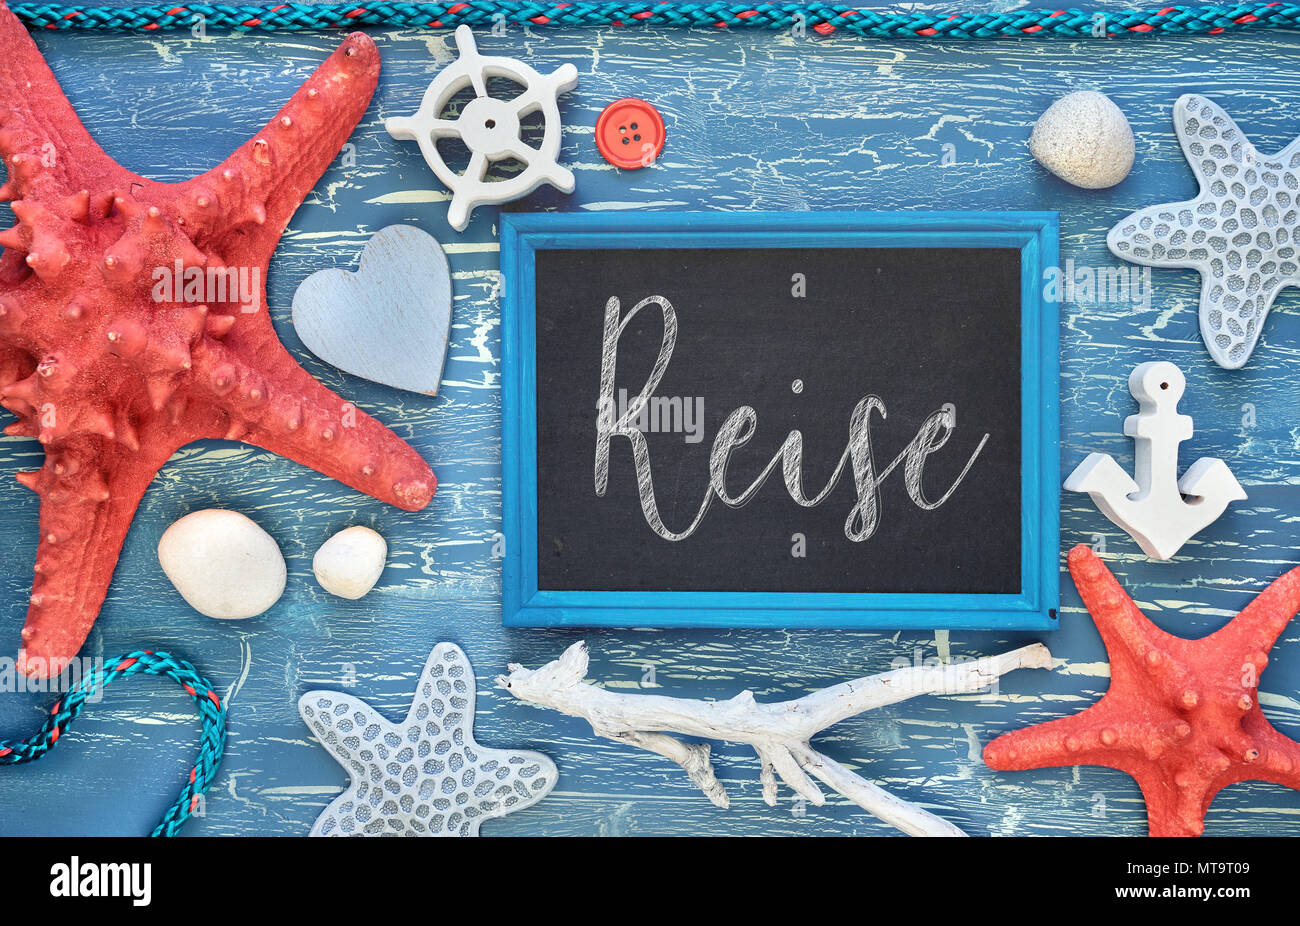 Blackboard With Maritime Decorations on cracked blue wood, text in German. 'Reise' means 'Vacations'. Stock Photo